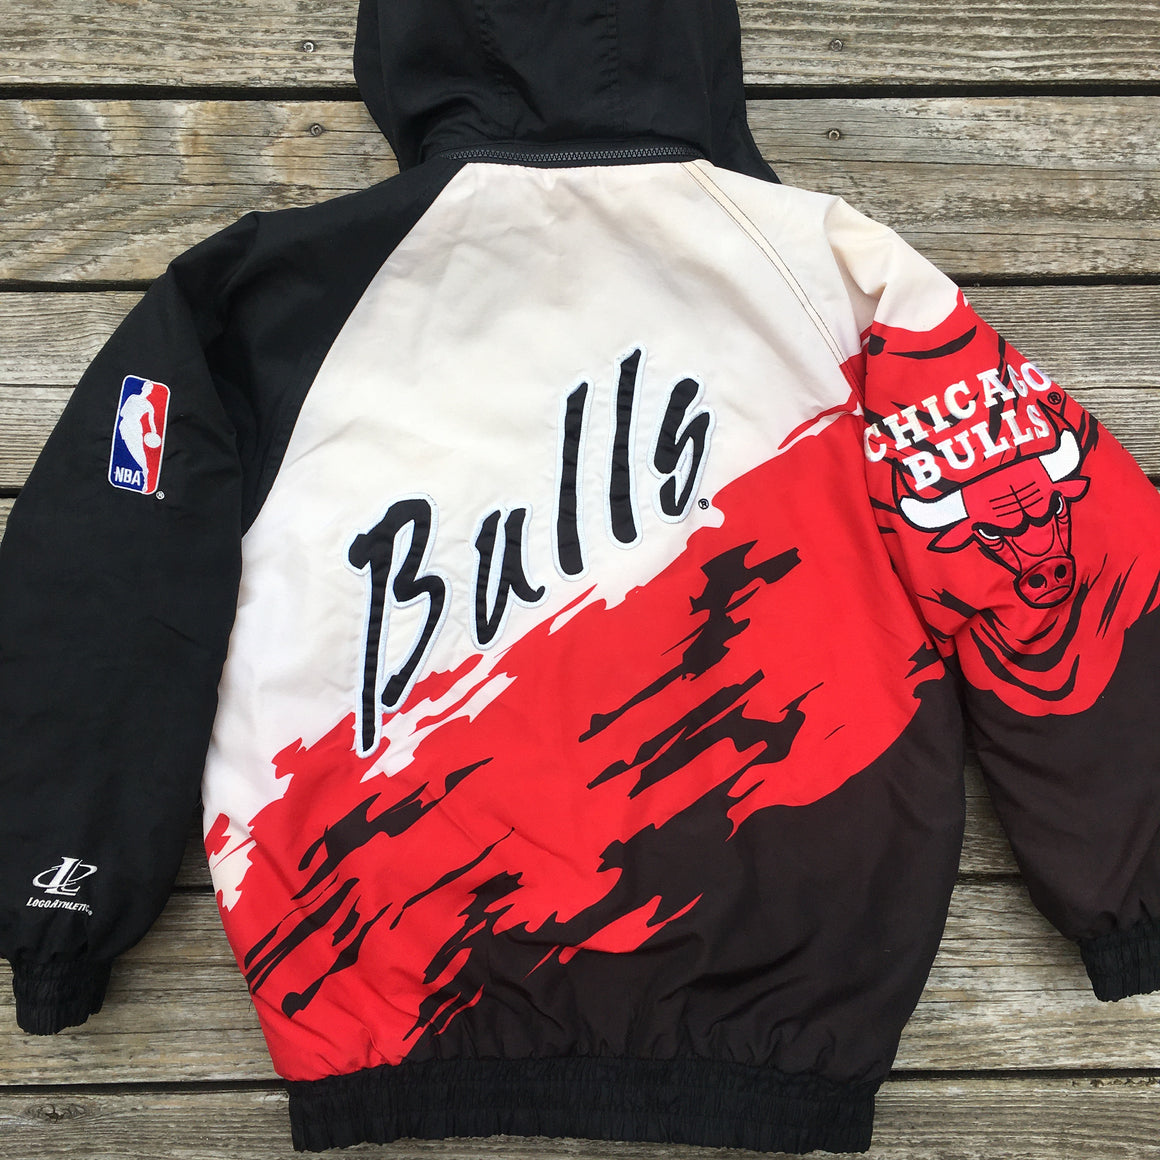 Chicago Bulls puffer jacket - Youth XL / Adult S-M